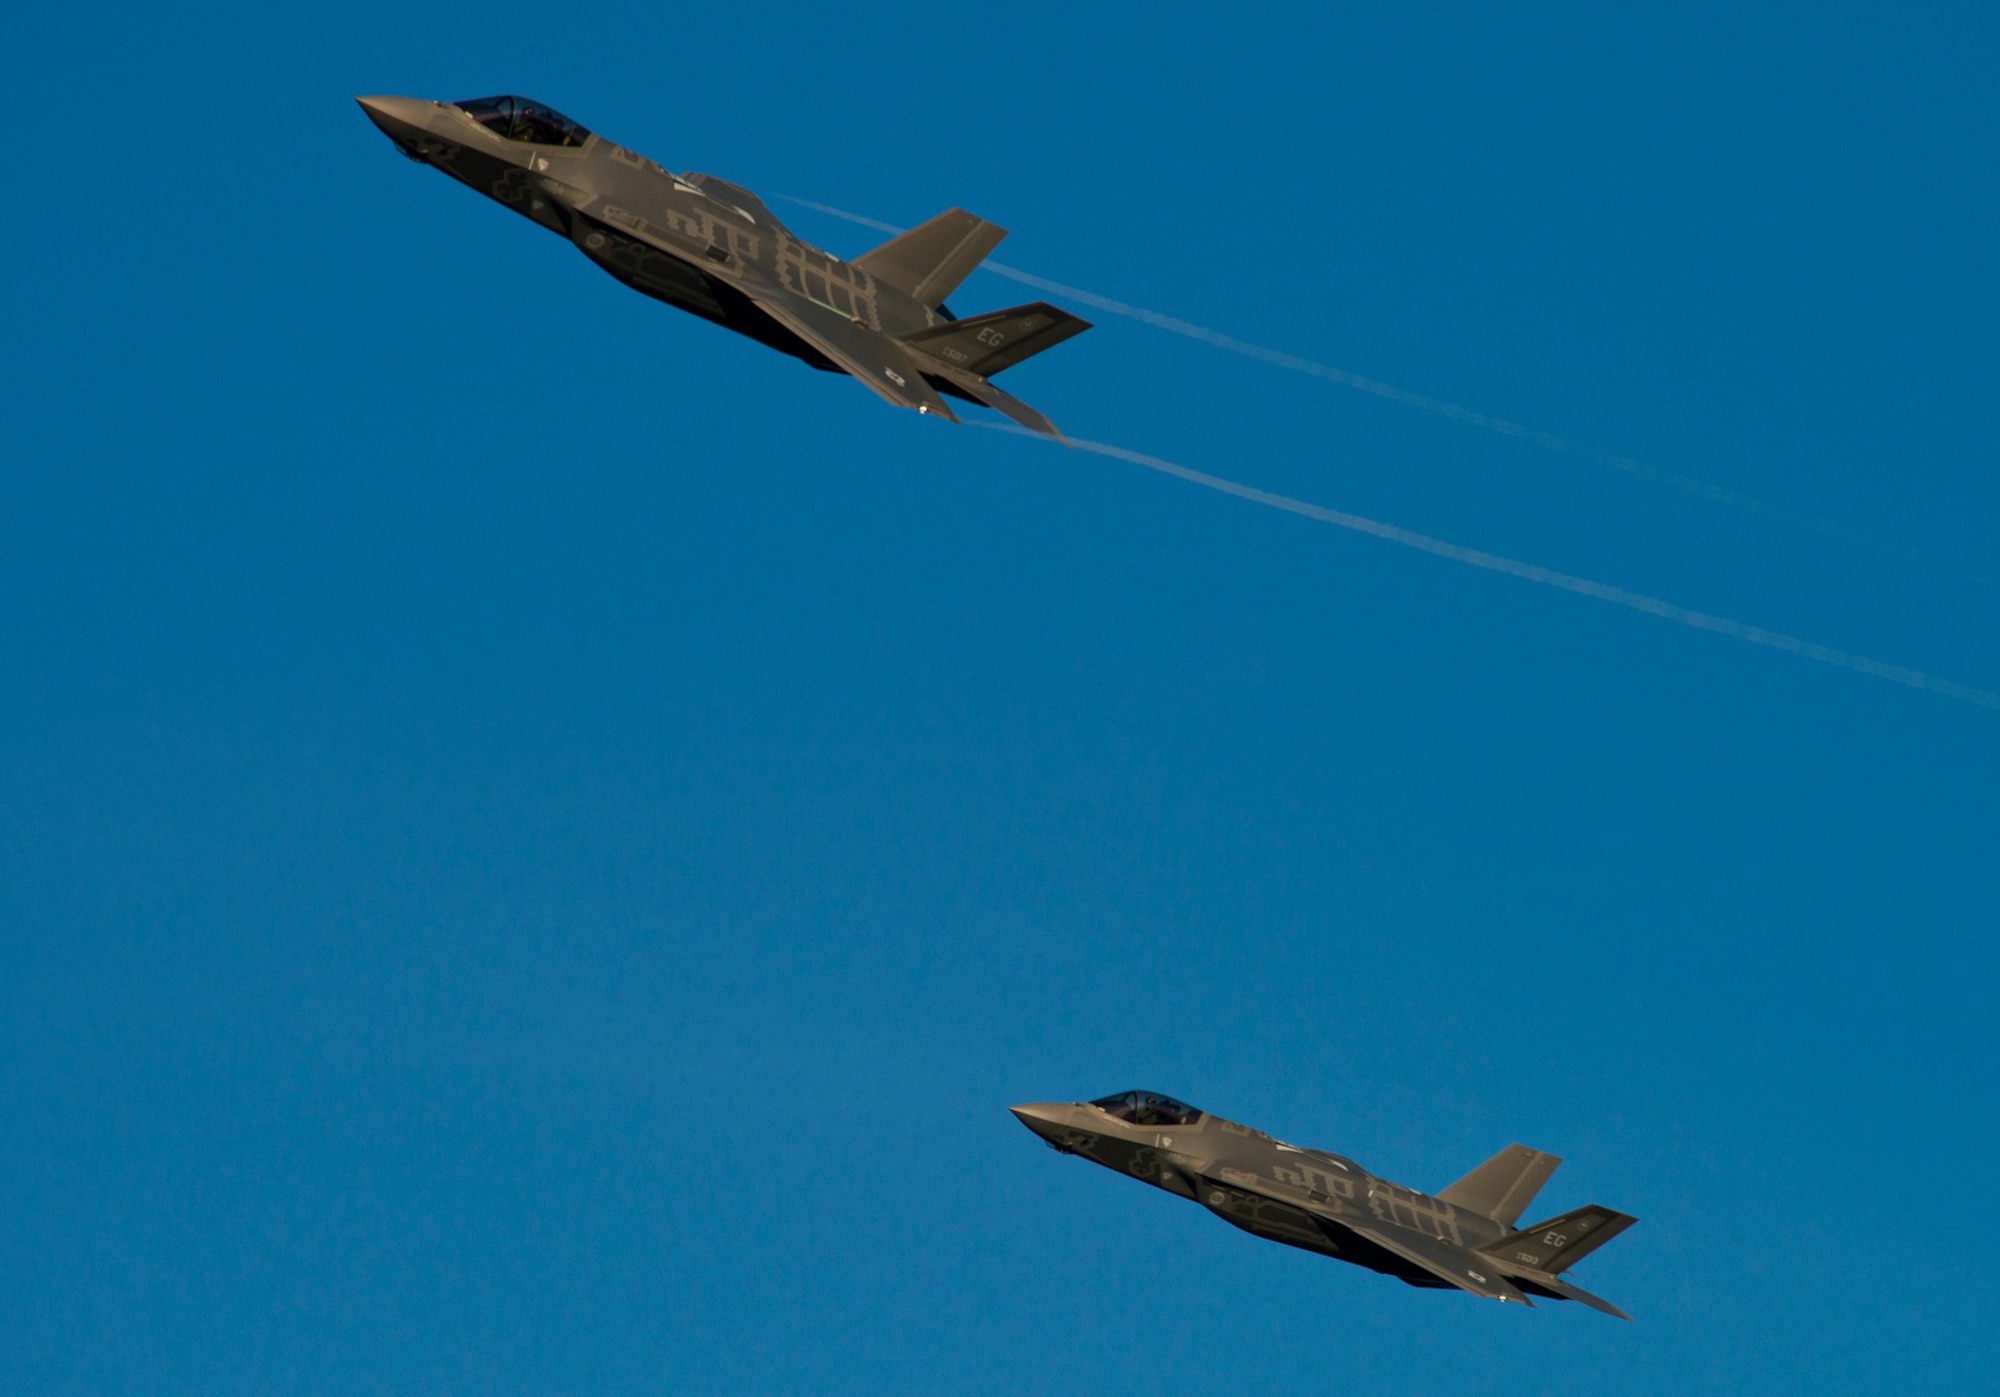 A pair of F-35A Lightning IIs rom the 33rd Fighter Wing streaks across the sky above Eglin Air Force Base, Fl. while coming in for landing after a training sortie. The 334rd Fighter Wing is responsible for F-35 A/B/C Lightning II pilot and maintainer training for the Marine Corps, the Navy, the Air Force and, in the future, at least eight coalition partners. Initially, 59 aircraft and three flying squadrons, one for each service/aircraft variant, will be established at Eglin. (U.S. Air Force photo/Tech. Sgt. Bennie J. Davis III)